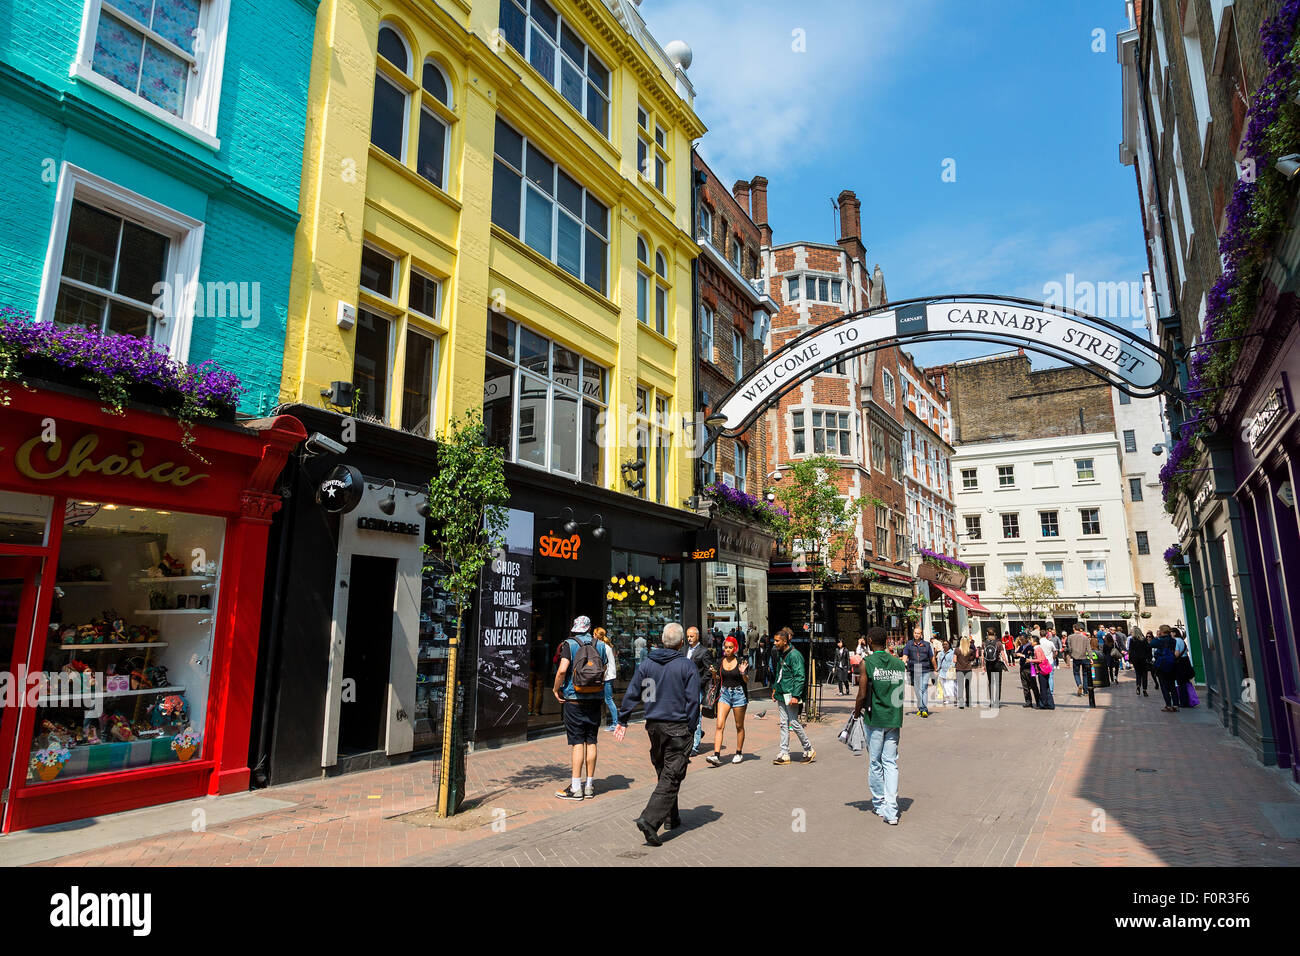 Londres, Carnaby Street Banque D'Images